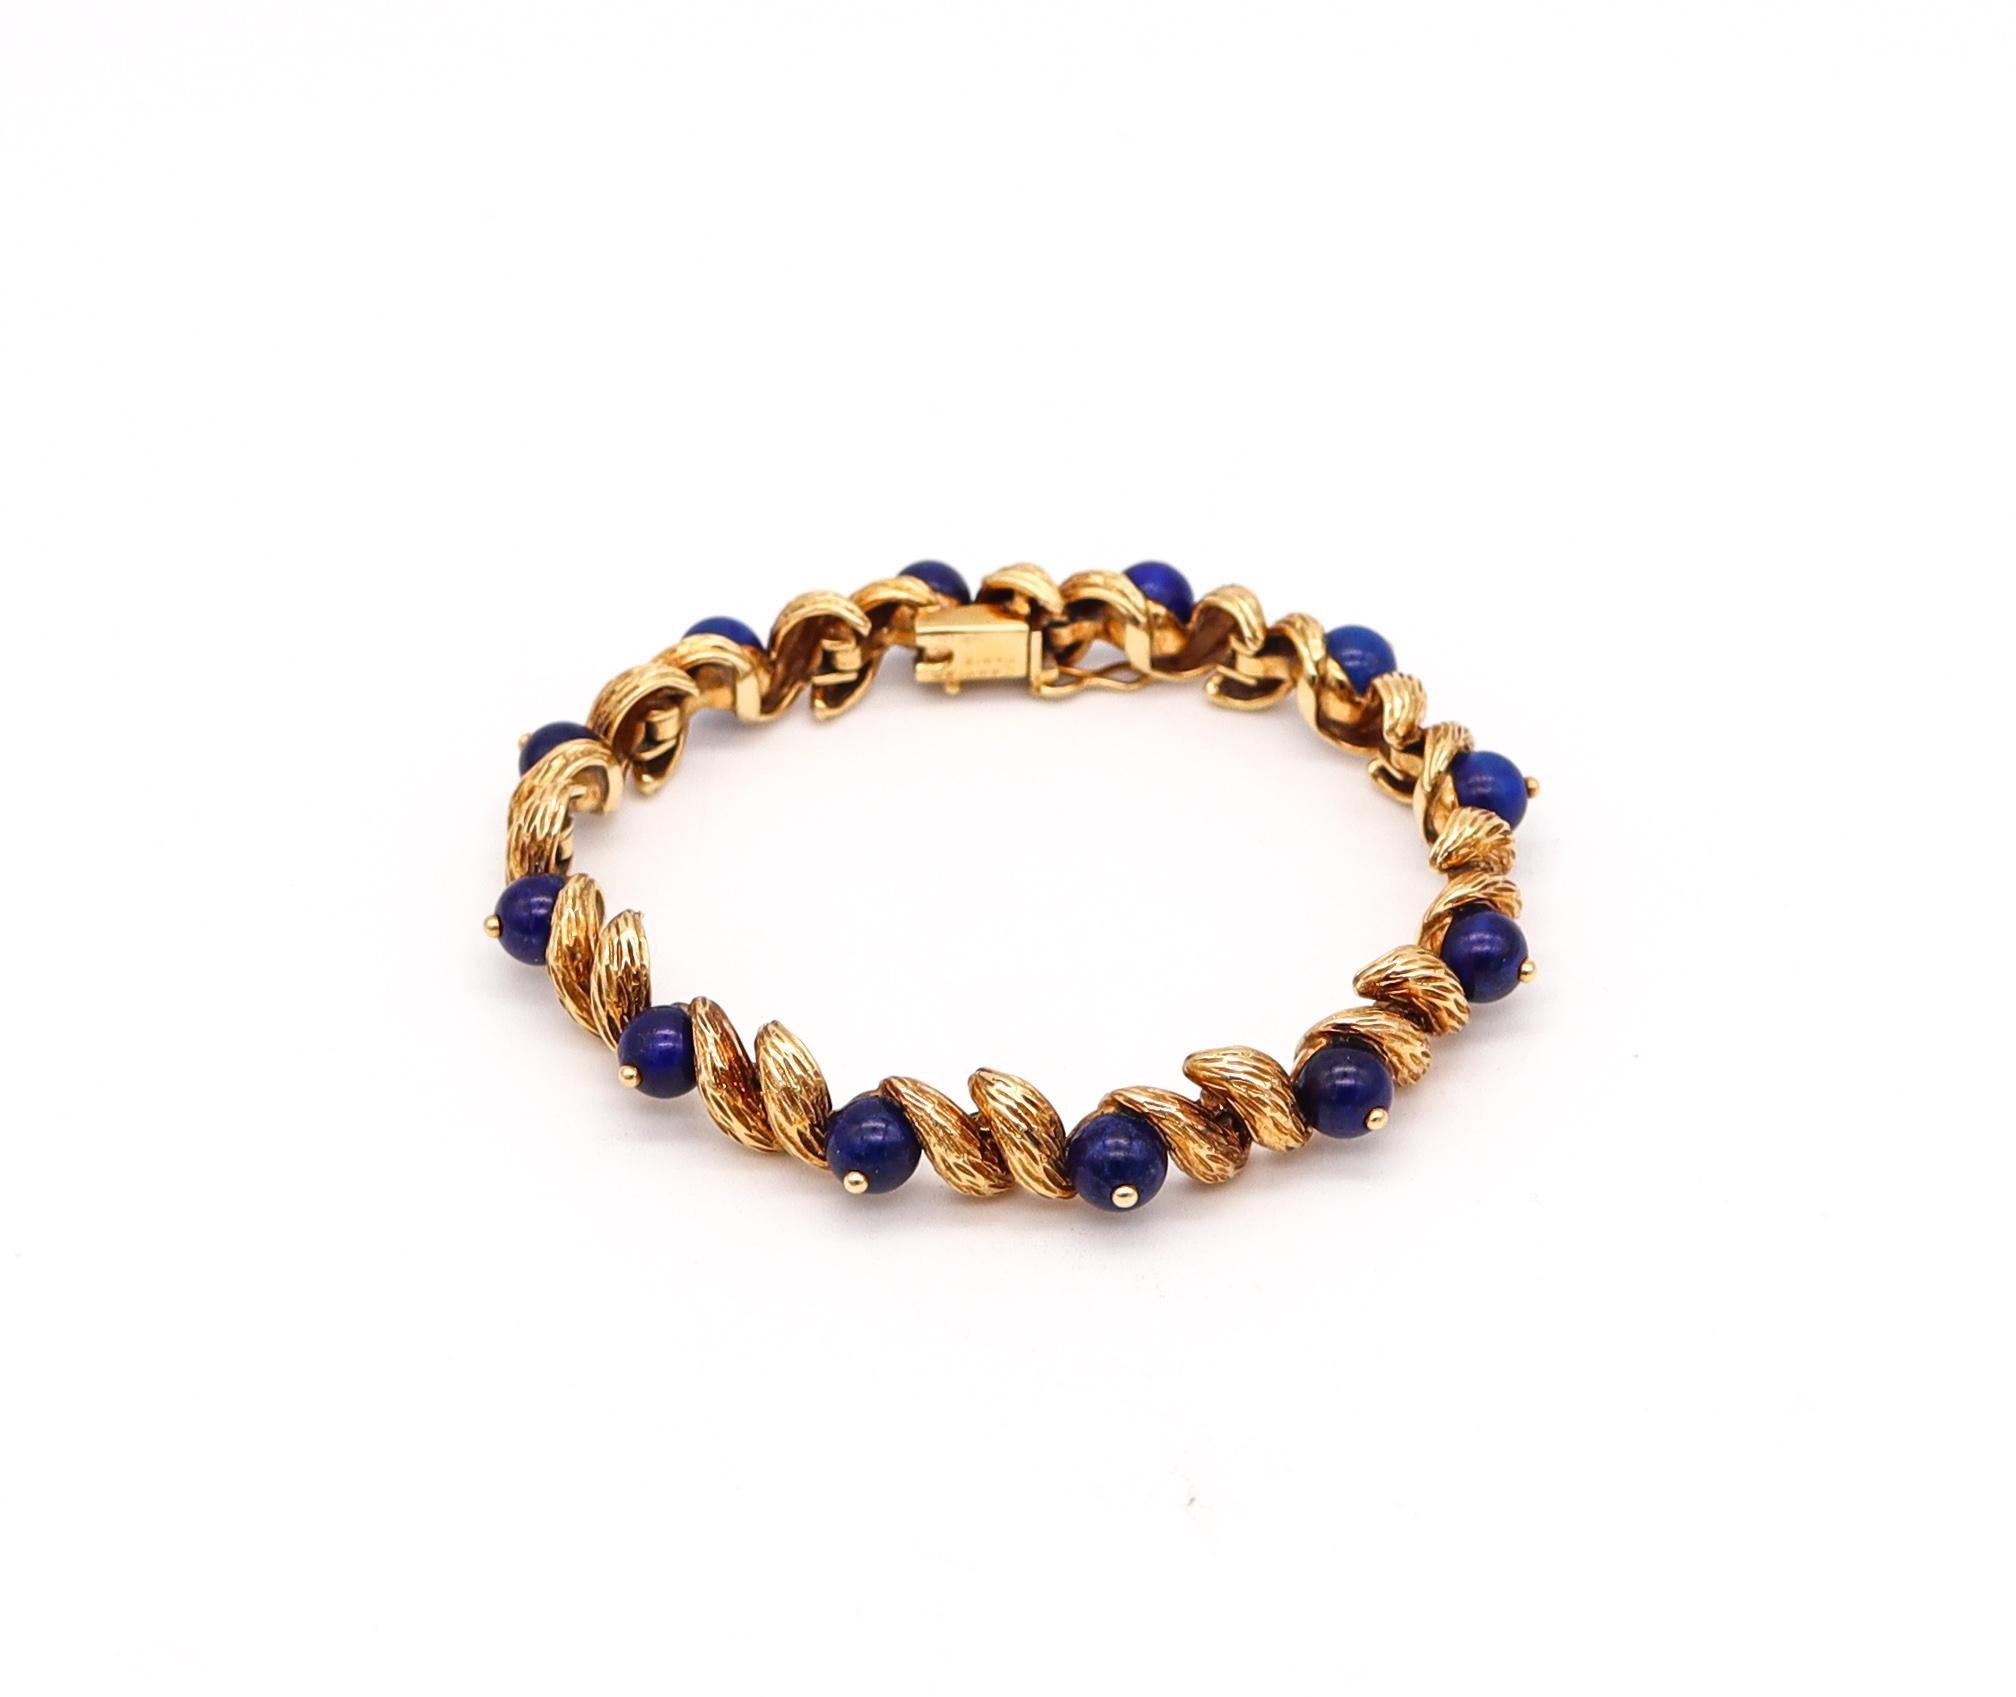 Retro bracelet designed by Cartier.

Beautiful rare bracelet, created in Paris France by the house of Cartier during the postwar period, back in the 1950's. This flexible bracelet has been crafted in solid yellow gold of 18 karats with textured